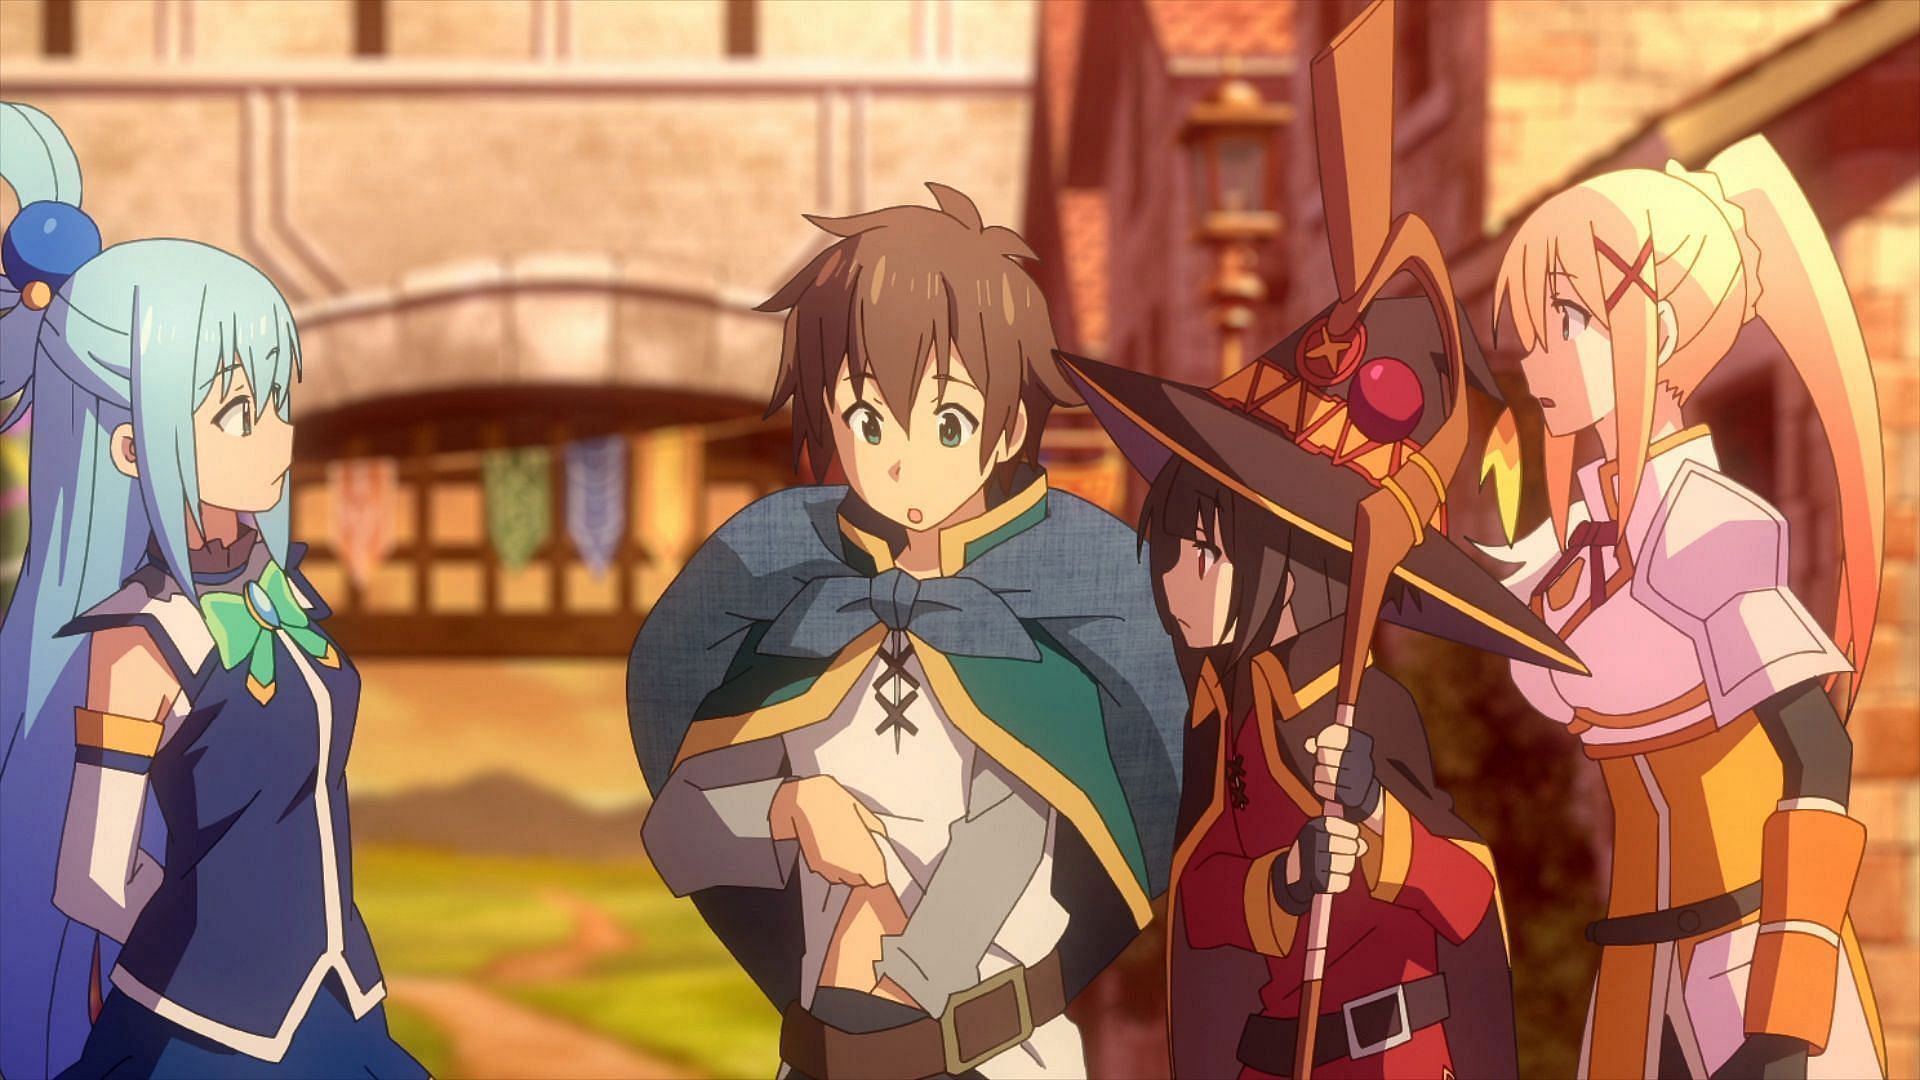 Kazuma and co get a little too &quot;at home&quot; in Lord Alderp&#039;s mansion in Konosuba season 3 episode 4 (Image via Drive)